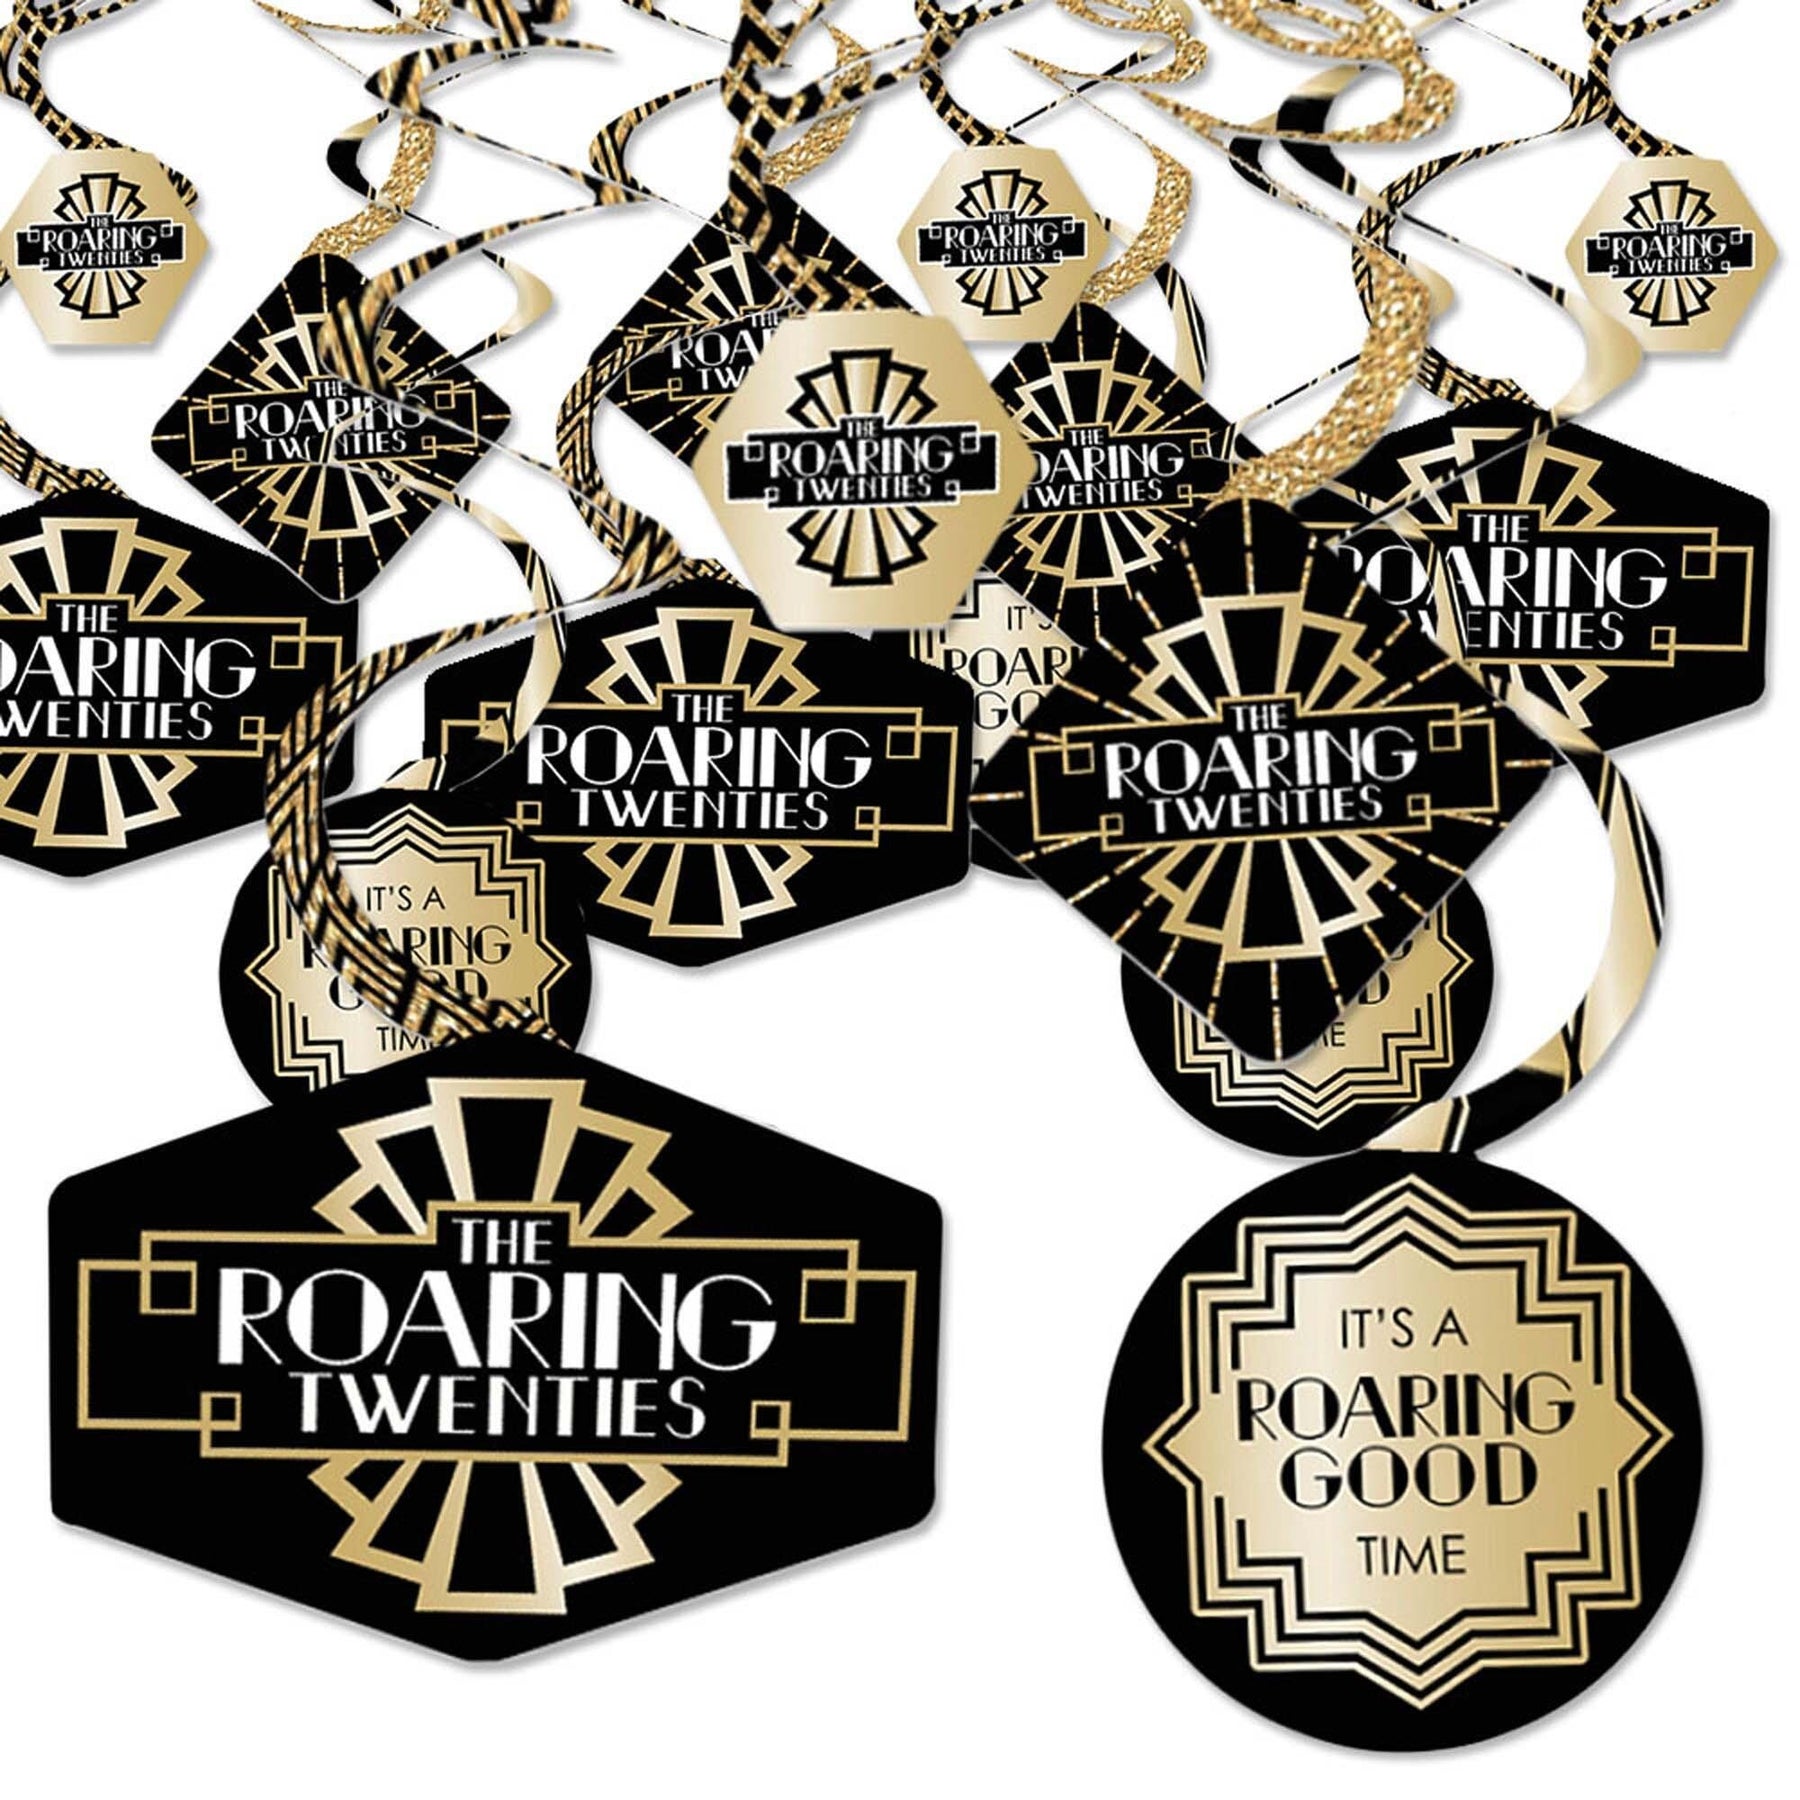 Roaring 20's - 1920s Art Deco Jazz Party Hanging Decor - Party